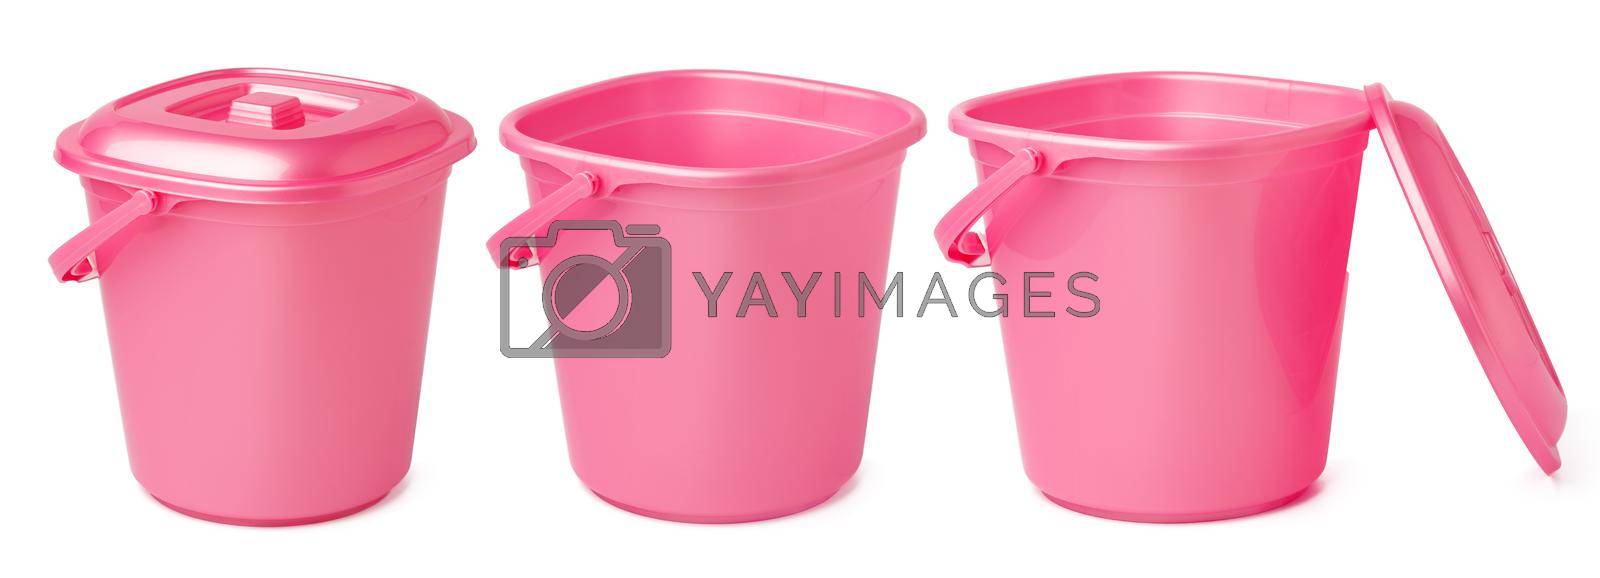 Royalty free image of Plastic bucket with handle isolated on white background by Fabrikasimf